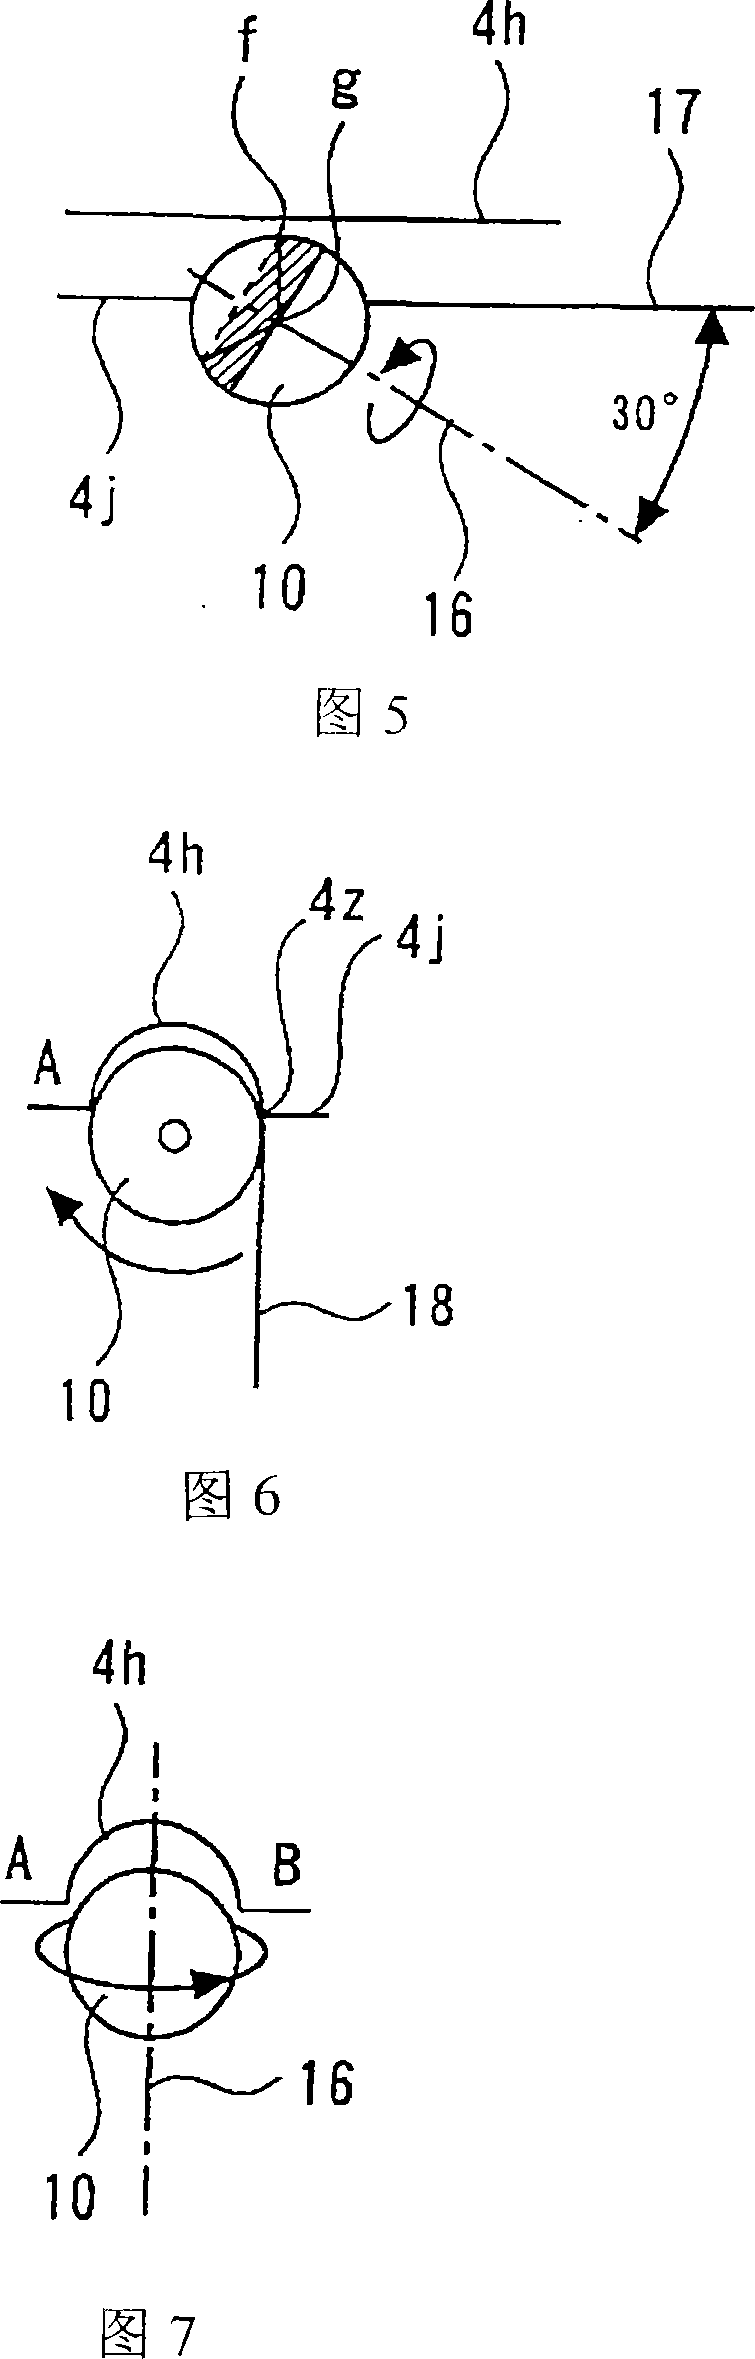 Apparatus and method for processing elevator wire rope groove